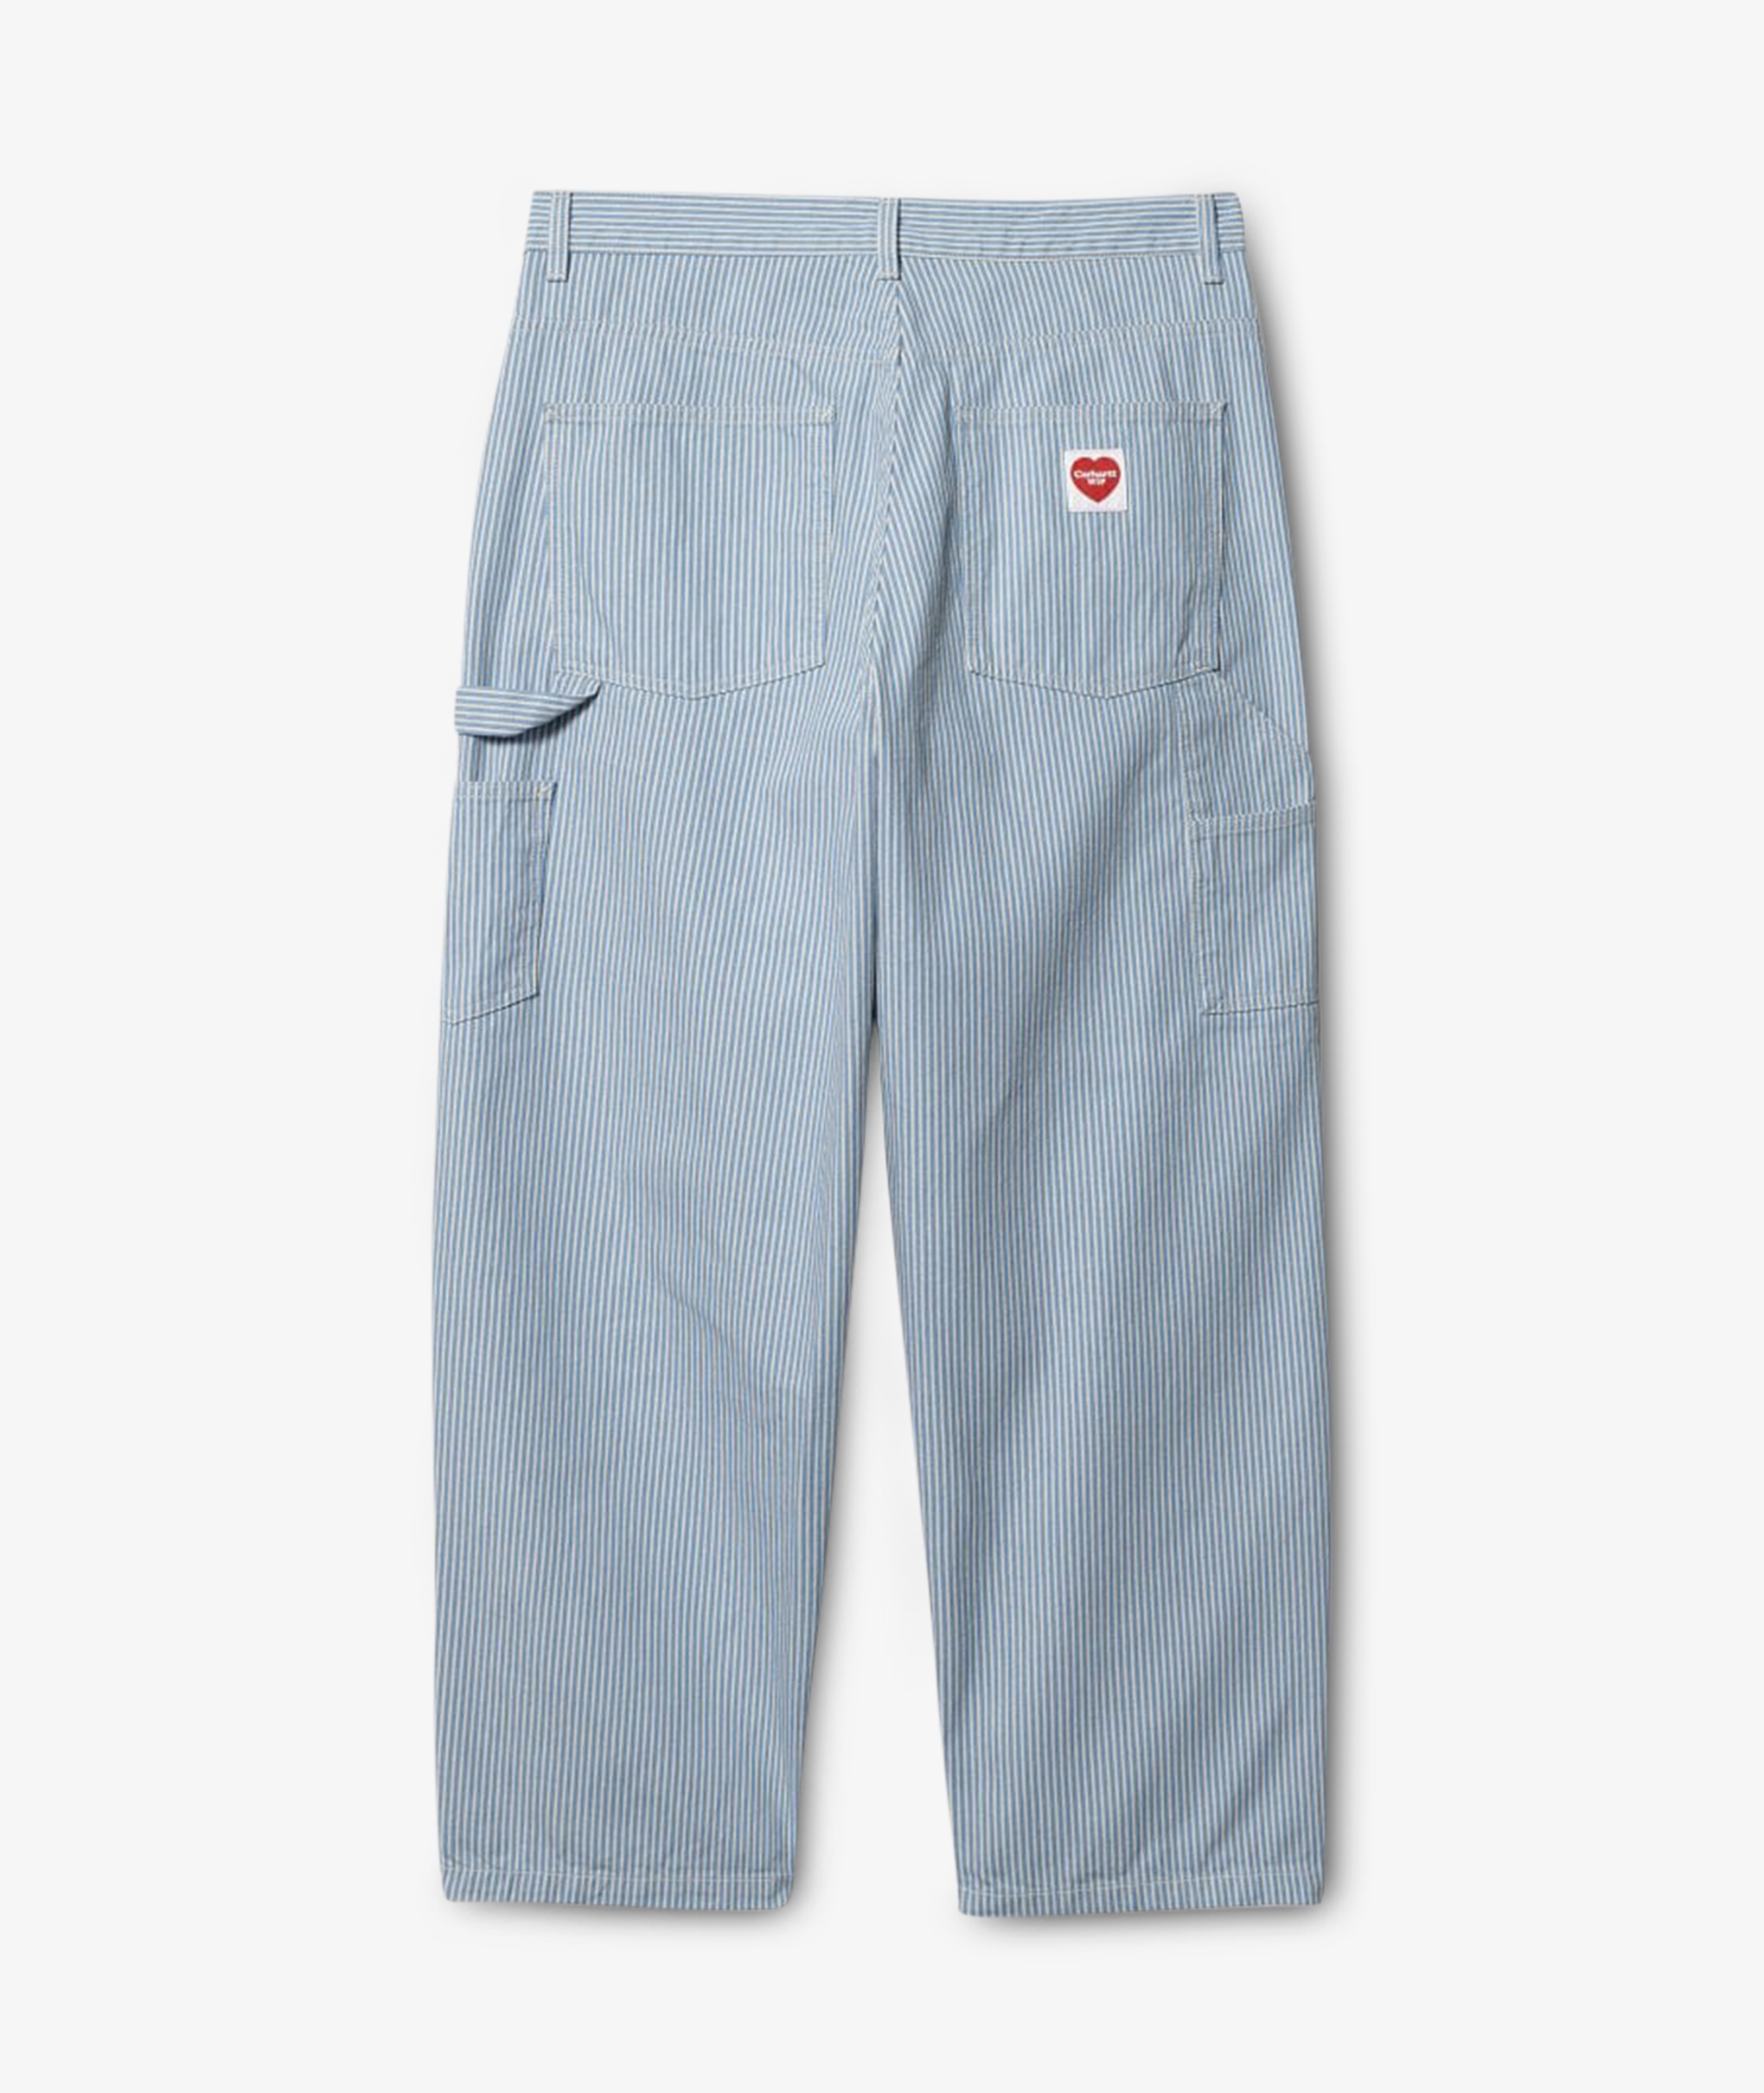 Norse Store  Shipping Worldwide - Carhartt WIP Terrell SK Pant